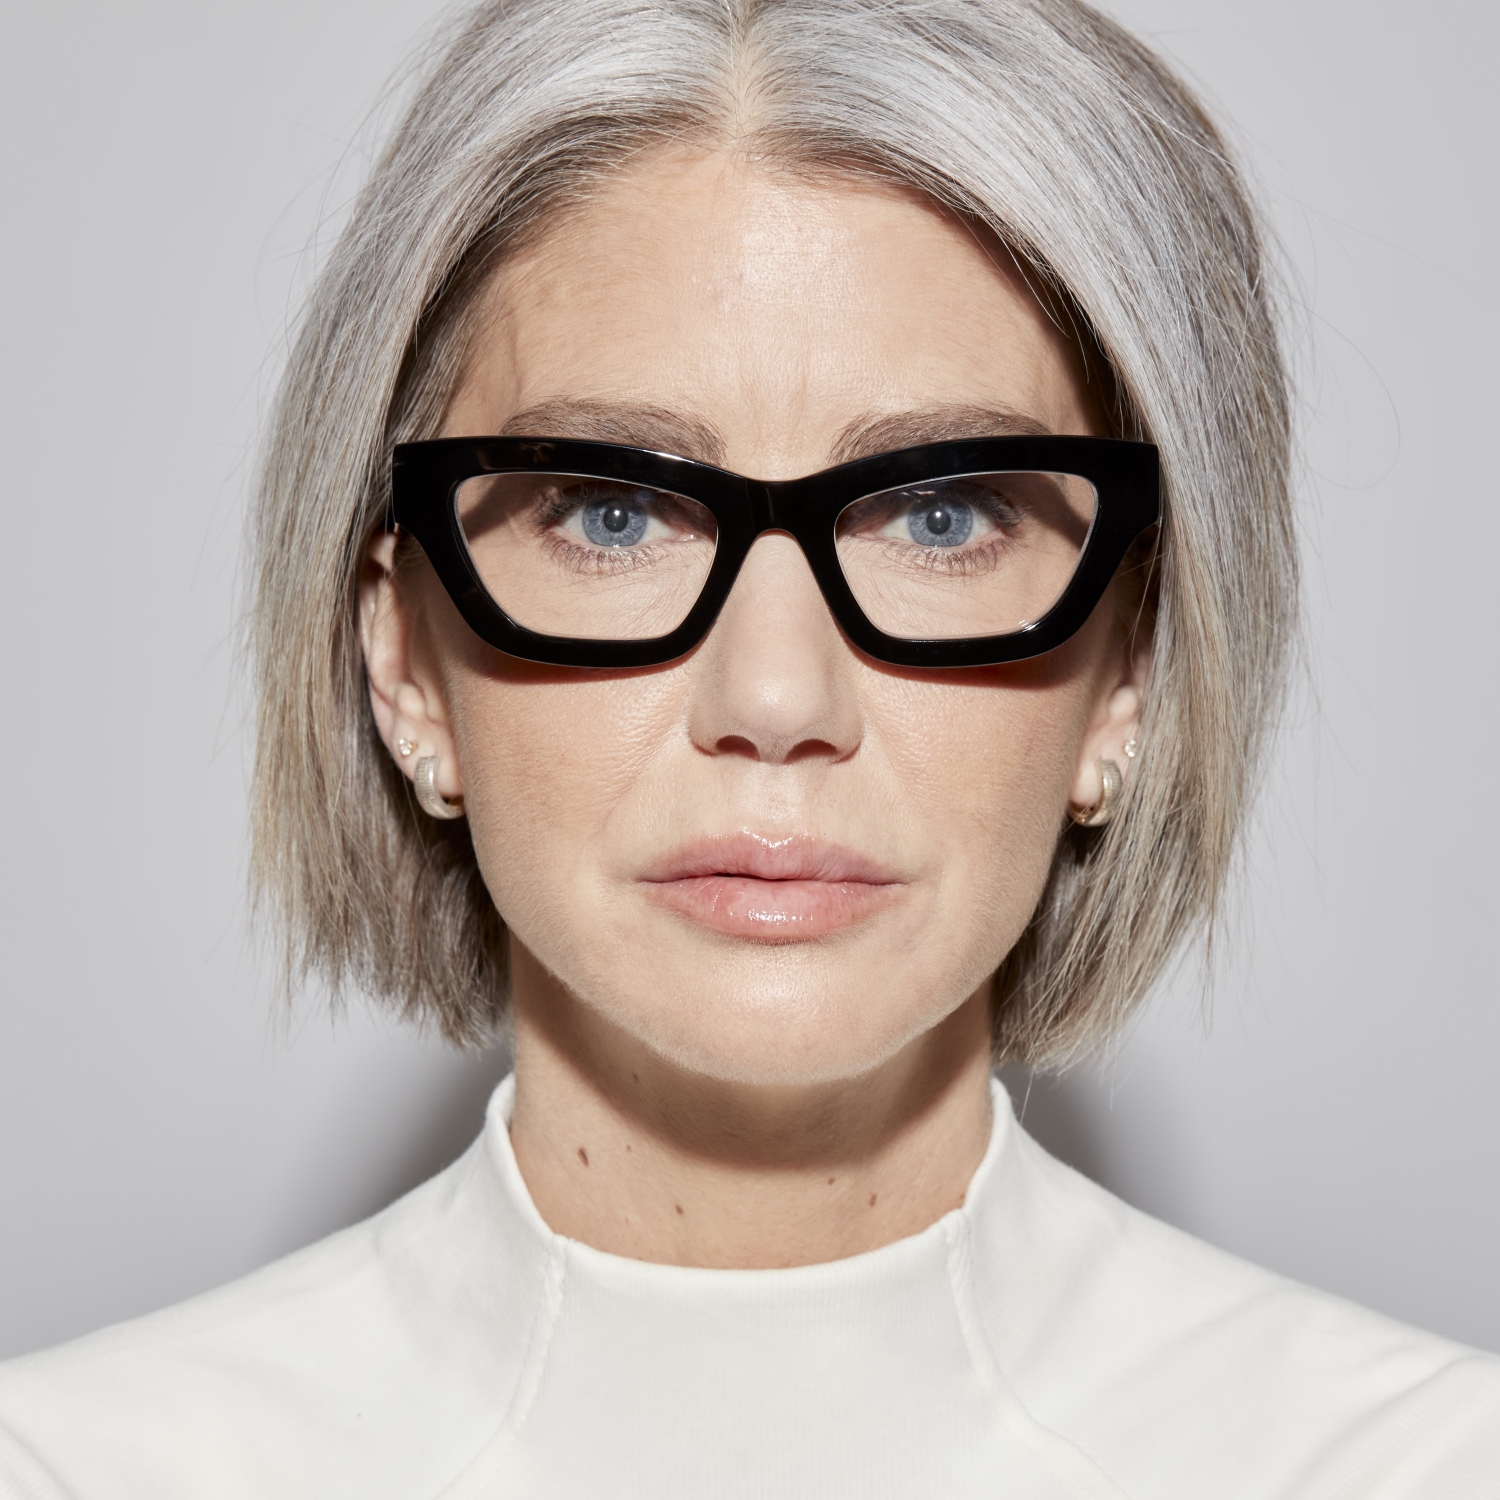 Photo of a man or woman wearing Jade Black Reading Glasses by French Kiwis